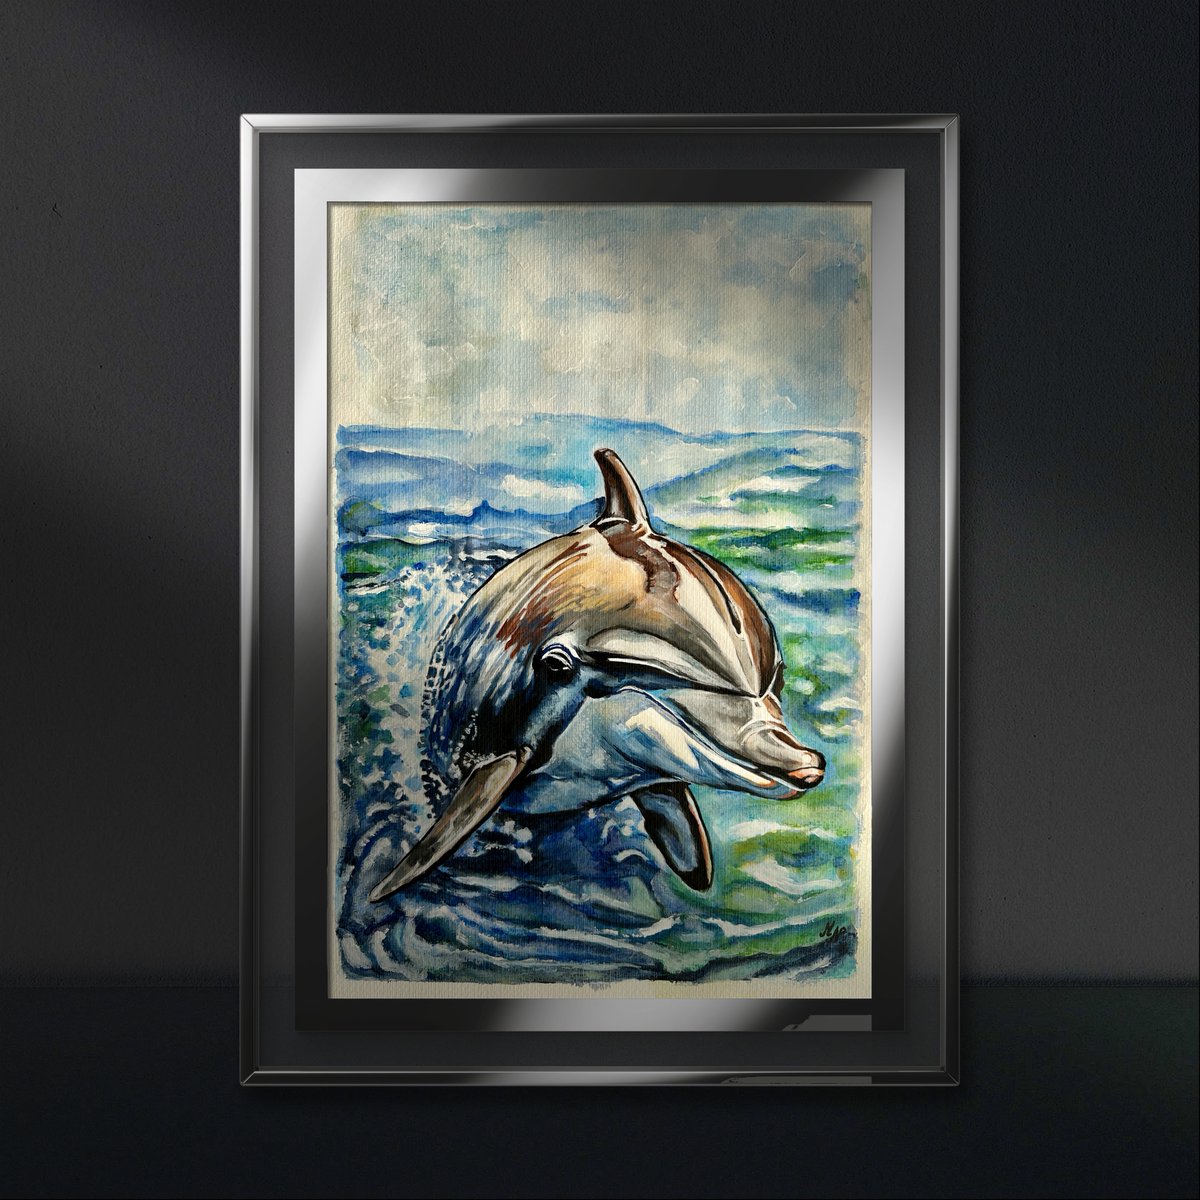 Dive into the serene world of 'Dolphin' 🐬 This stunning mixed-media painting captures the grace and beauty of these intelligent creatures as they glide through turquoise waters. #Dolphin #Art #MixedMedia #OceanLife #Creativity 🎨🌊 artcursor.com/products/dolph…